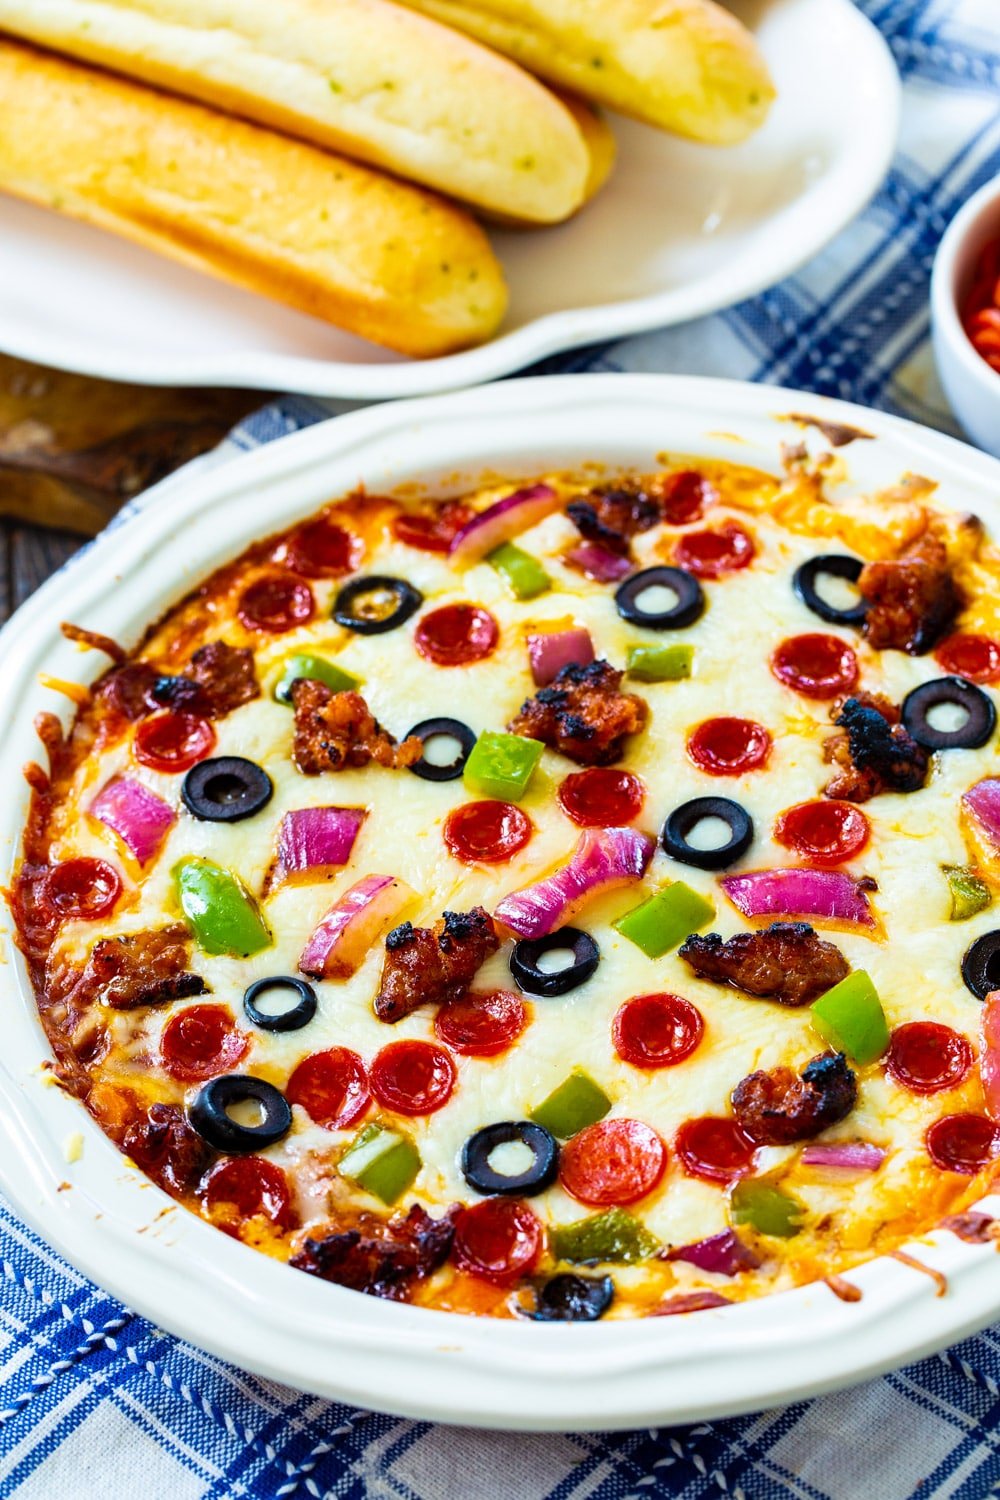 Supreme Pizza Dip with plate of bread sticks.